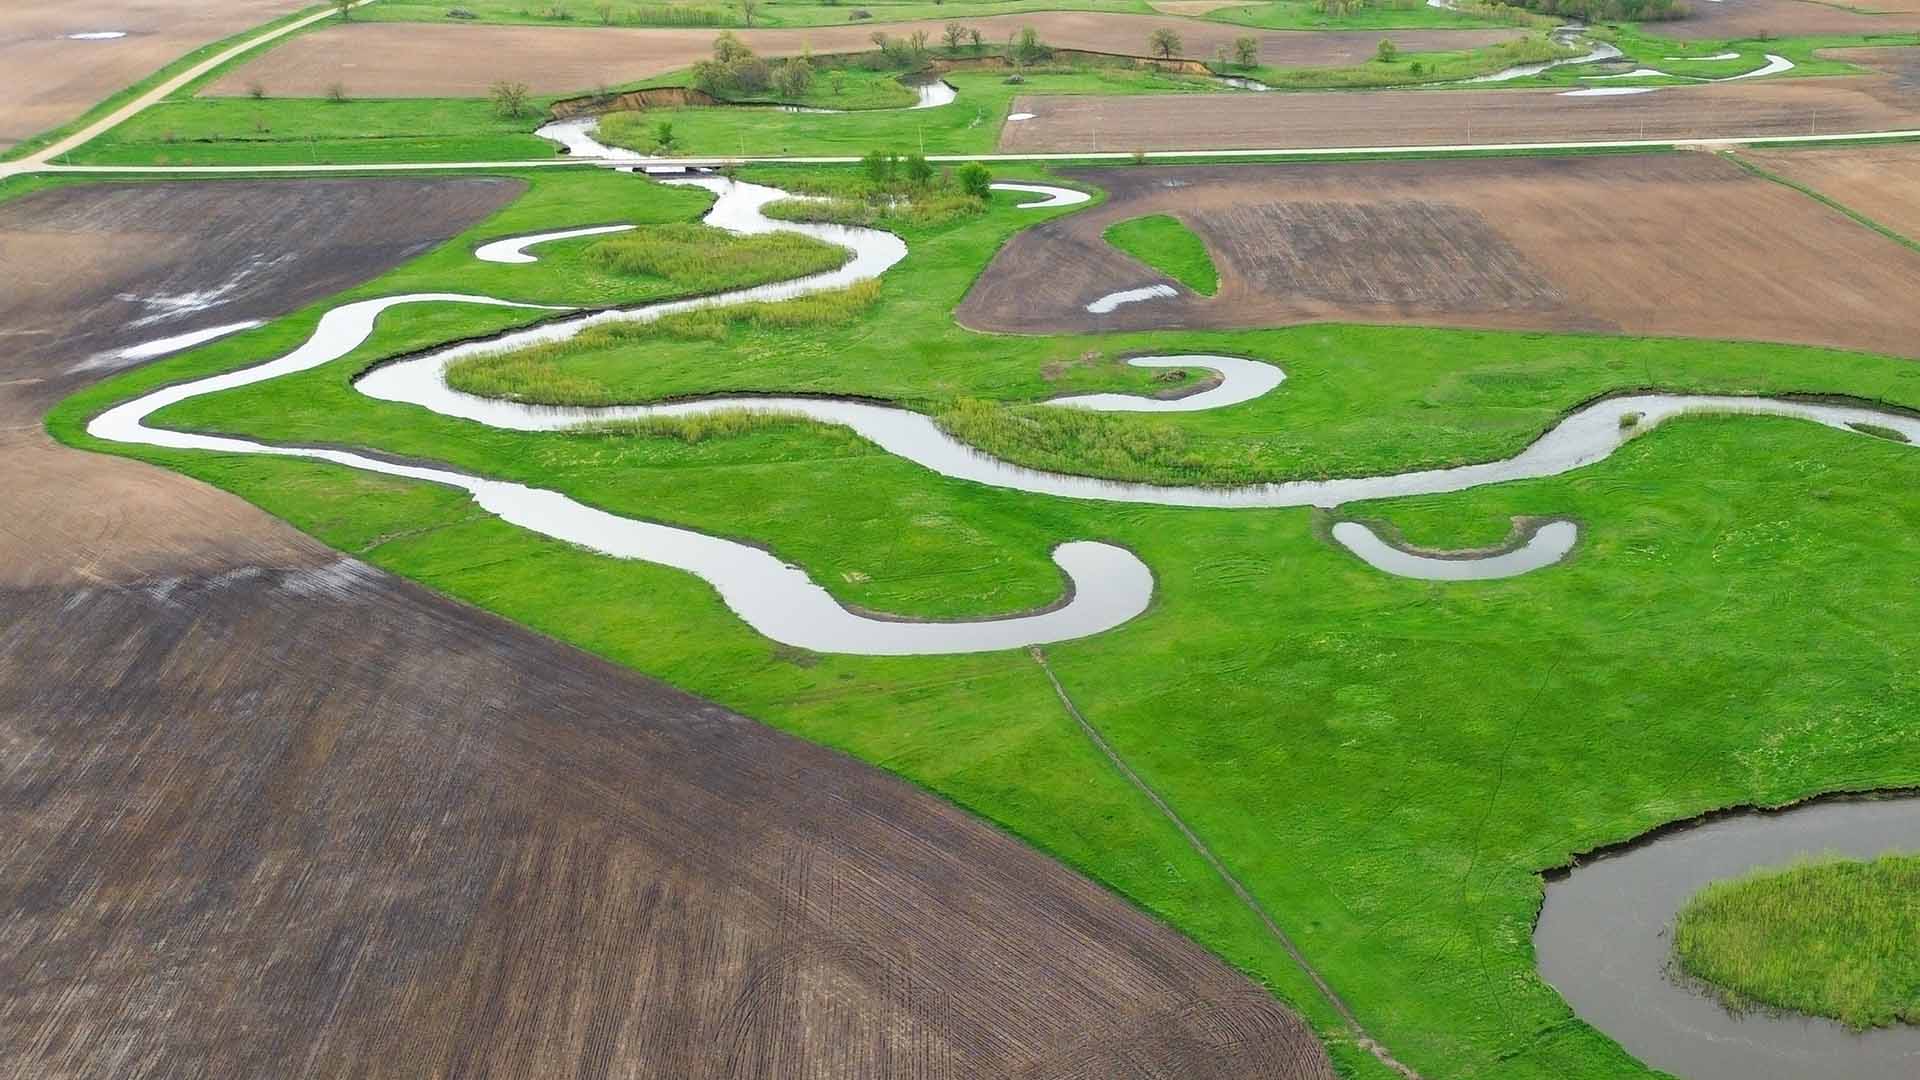 Many oxbows connected to stream in field